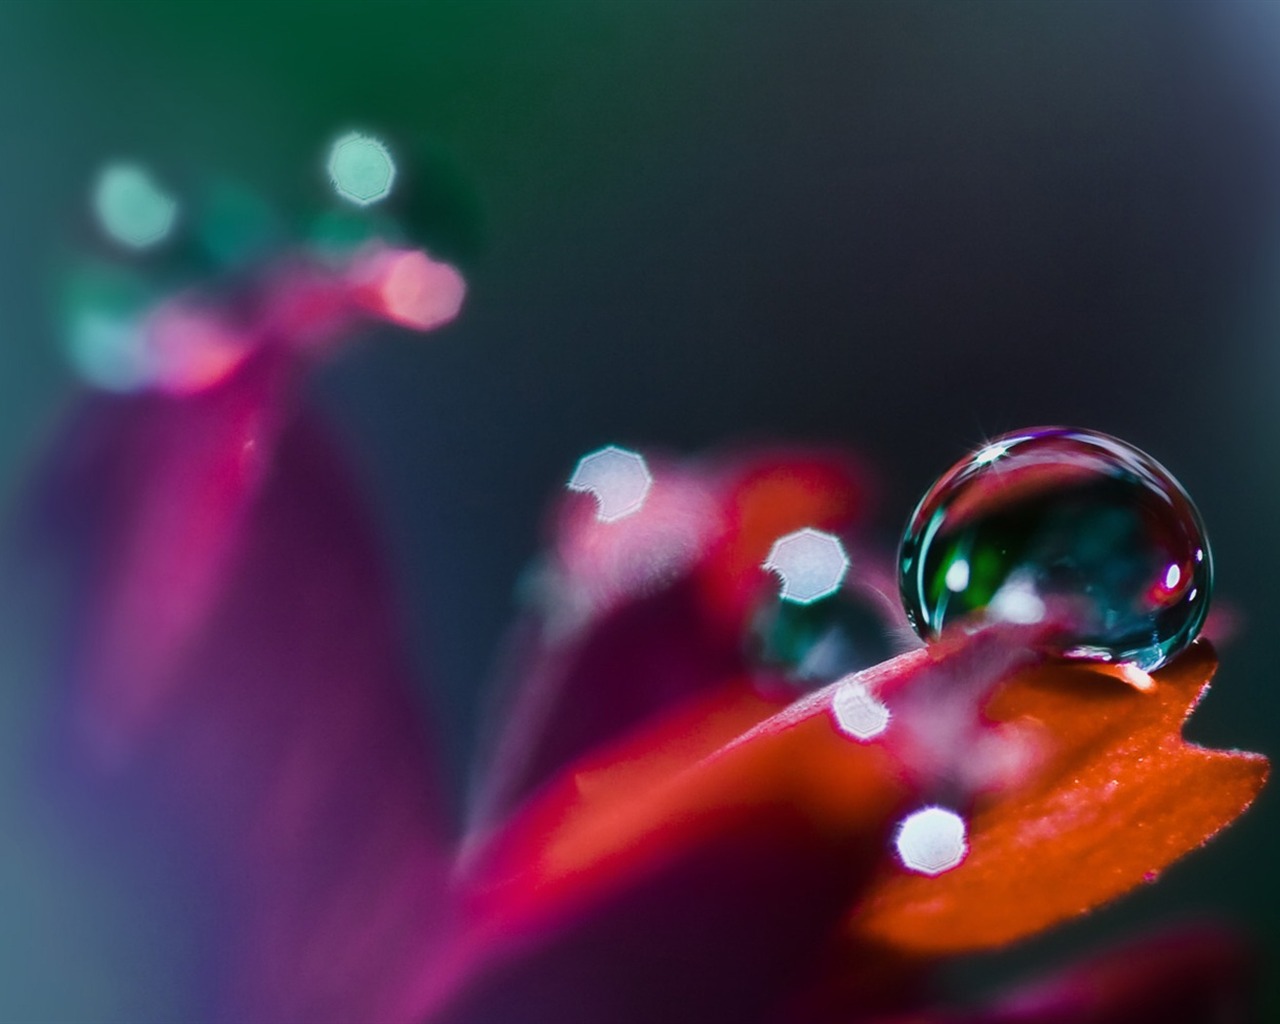 HD wallpaper flowers and drops of water #6 - 1280x1024